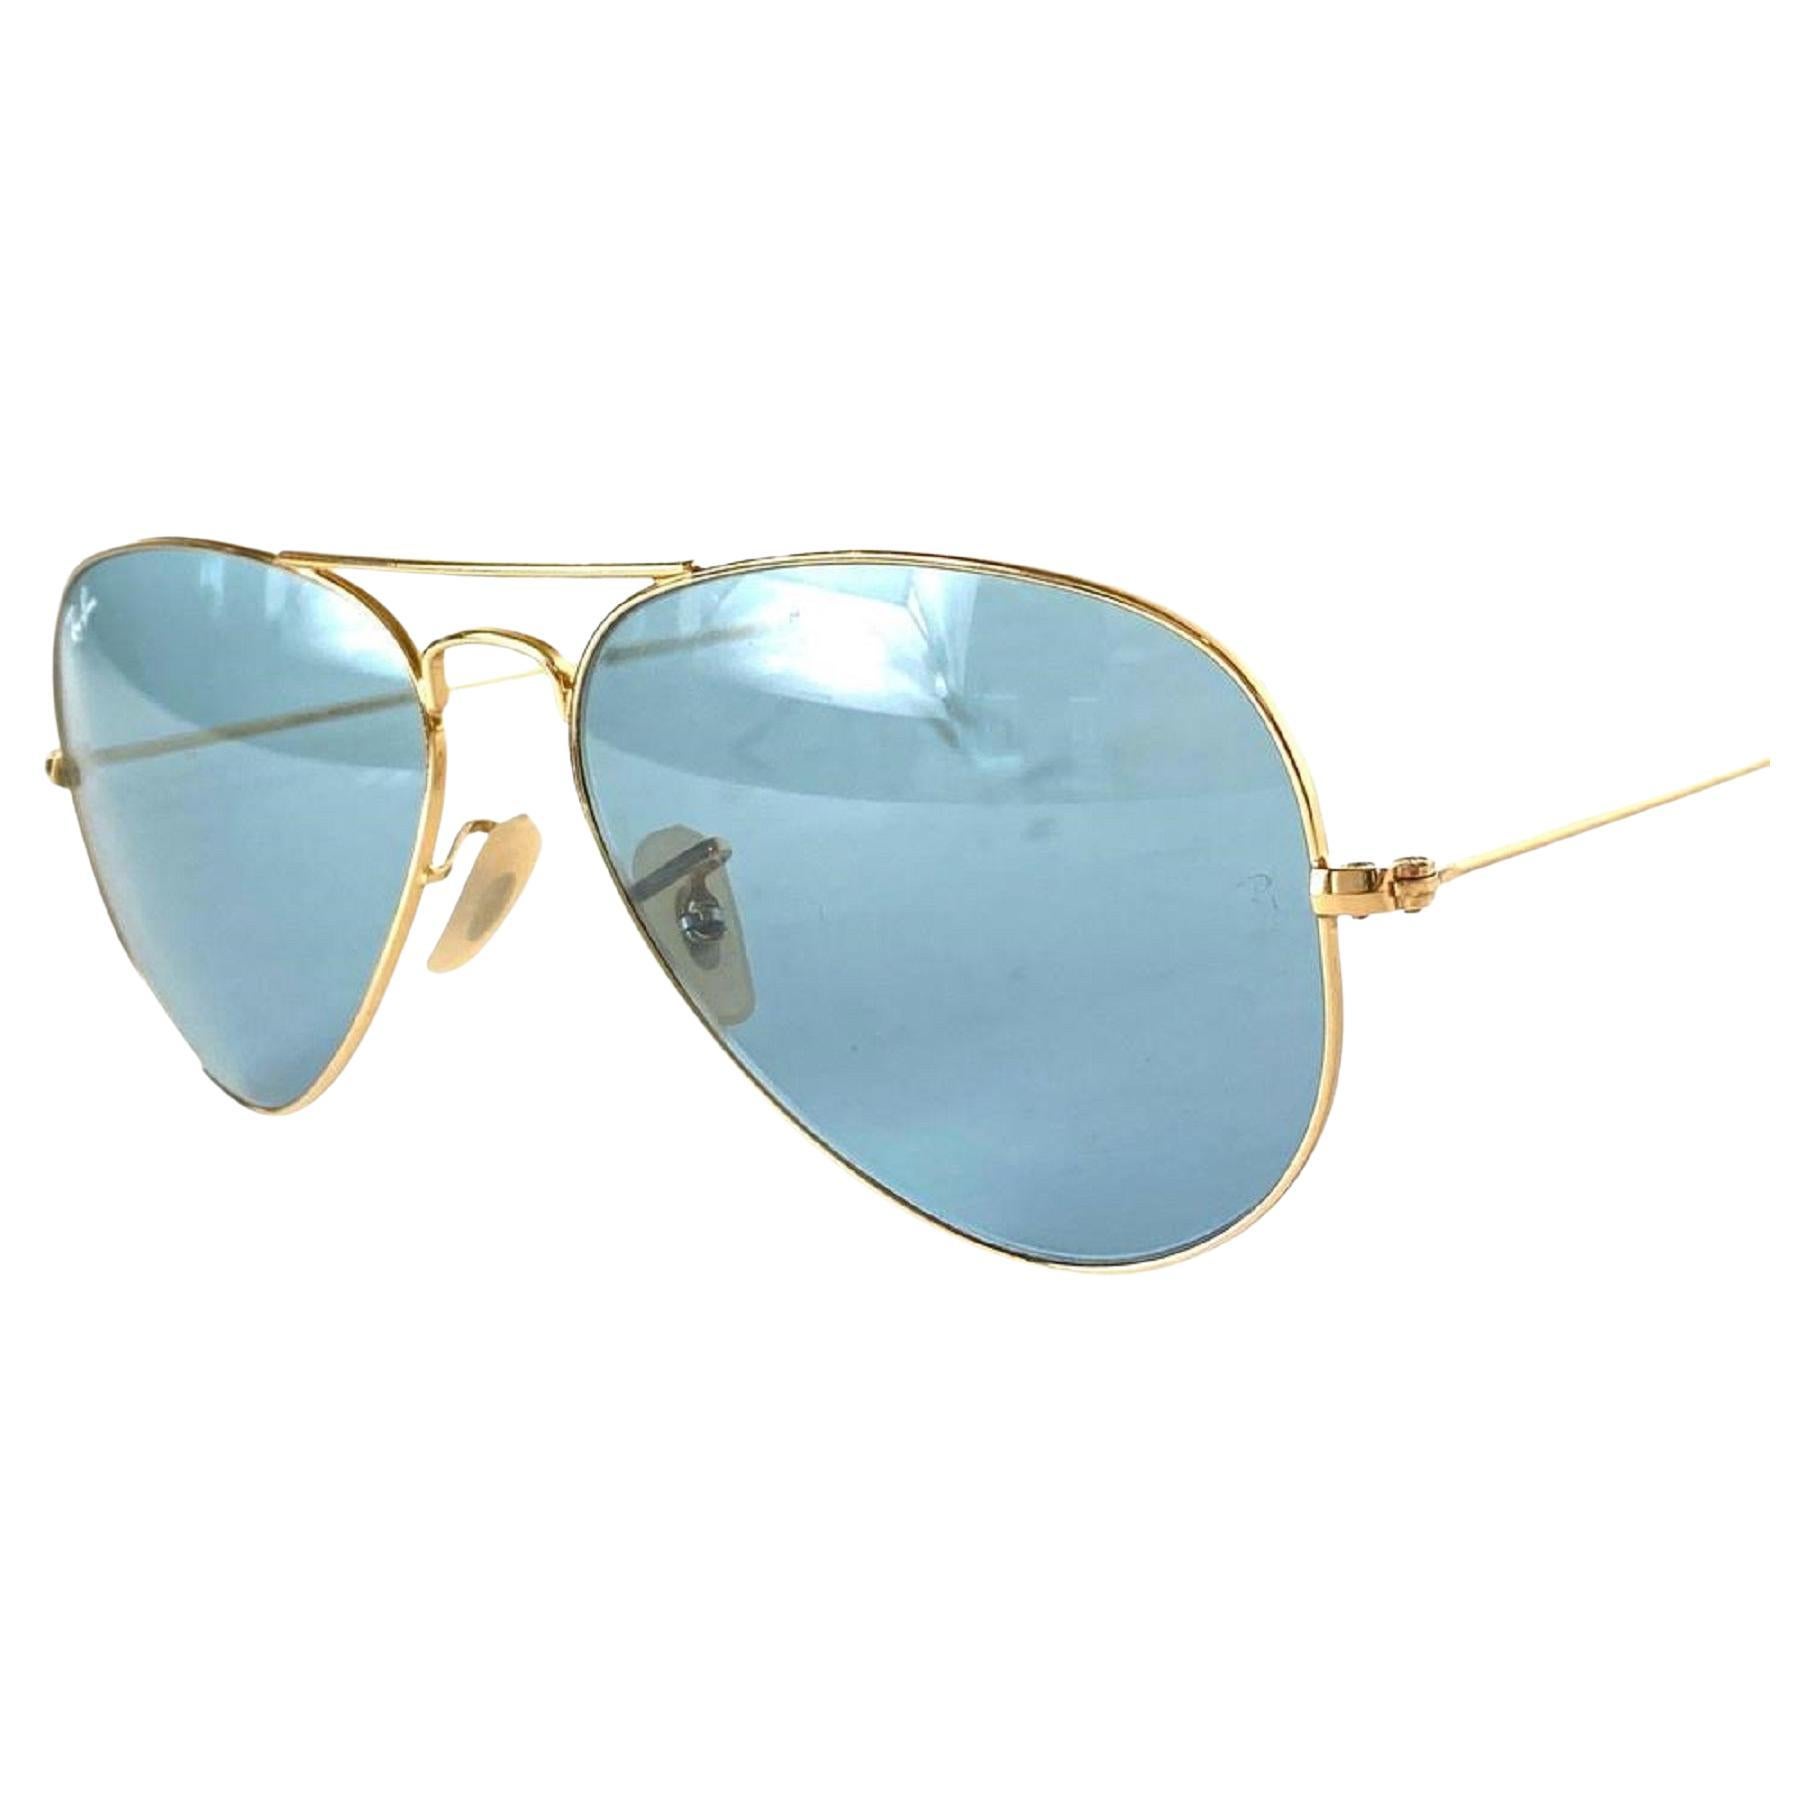 Lunettes de soleil Ray-Ban Gold Rb3025 Aviator 2ray65